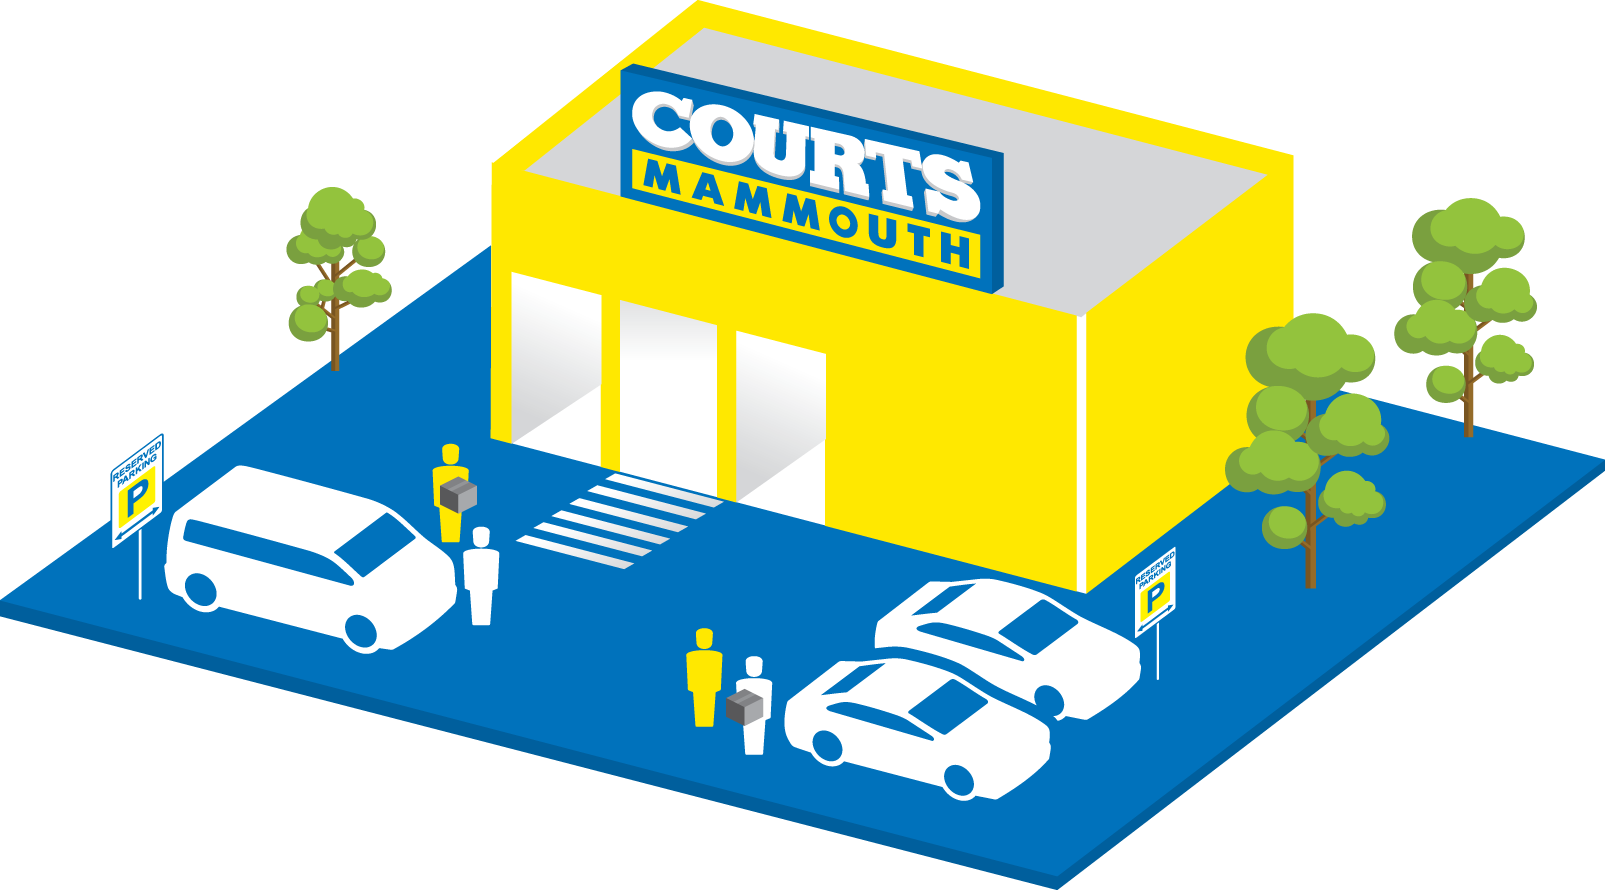 Courts mammoth online payment